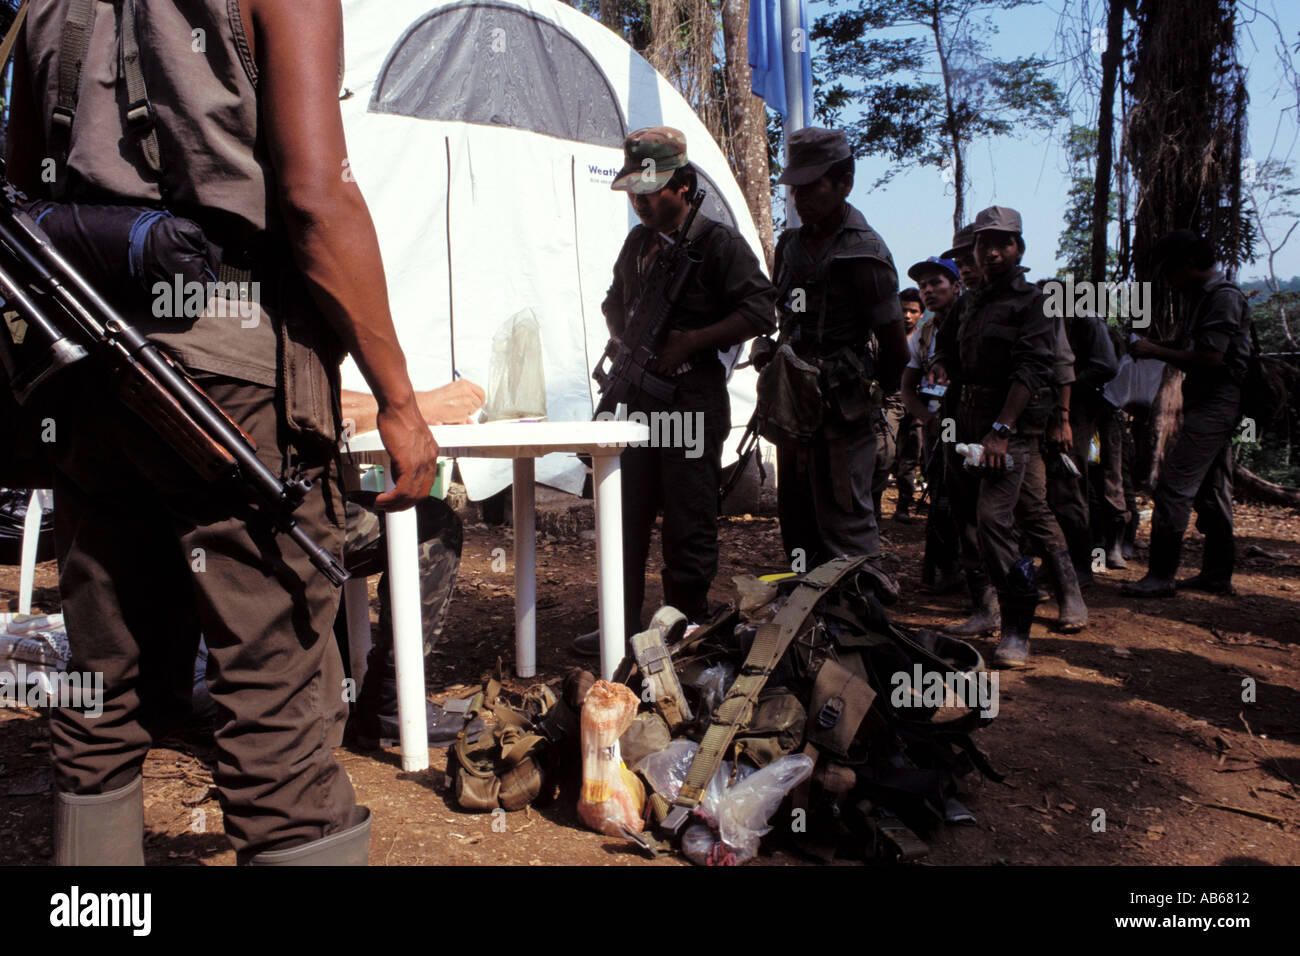 URNG guerrillas turning in their weapons as part of the peace accords signed in Guatemala in 1996 Stock Photo